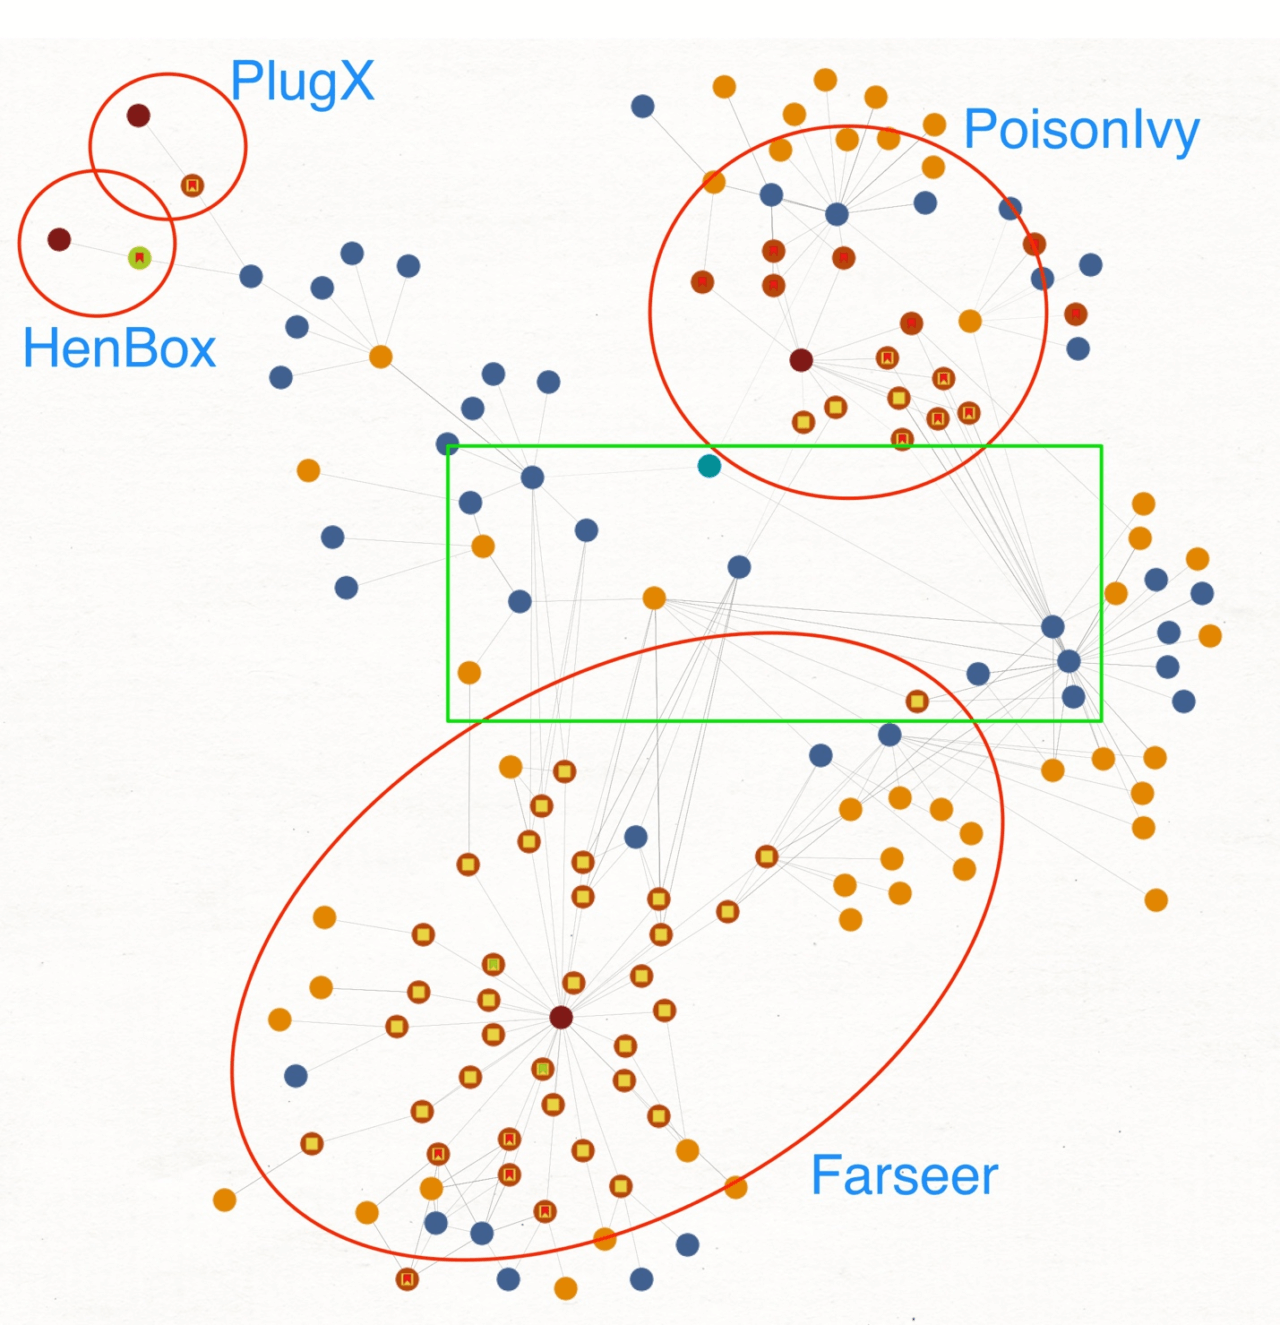 Figure-2-Maltego-chart-showing-overlaps-between-Farseer-and-related-threats-1-1280x1325.png